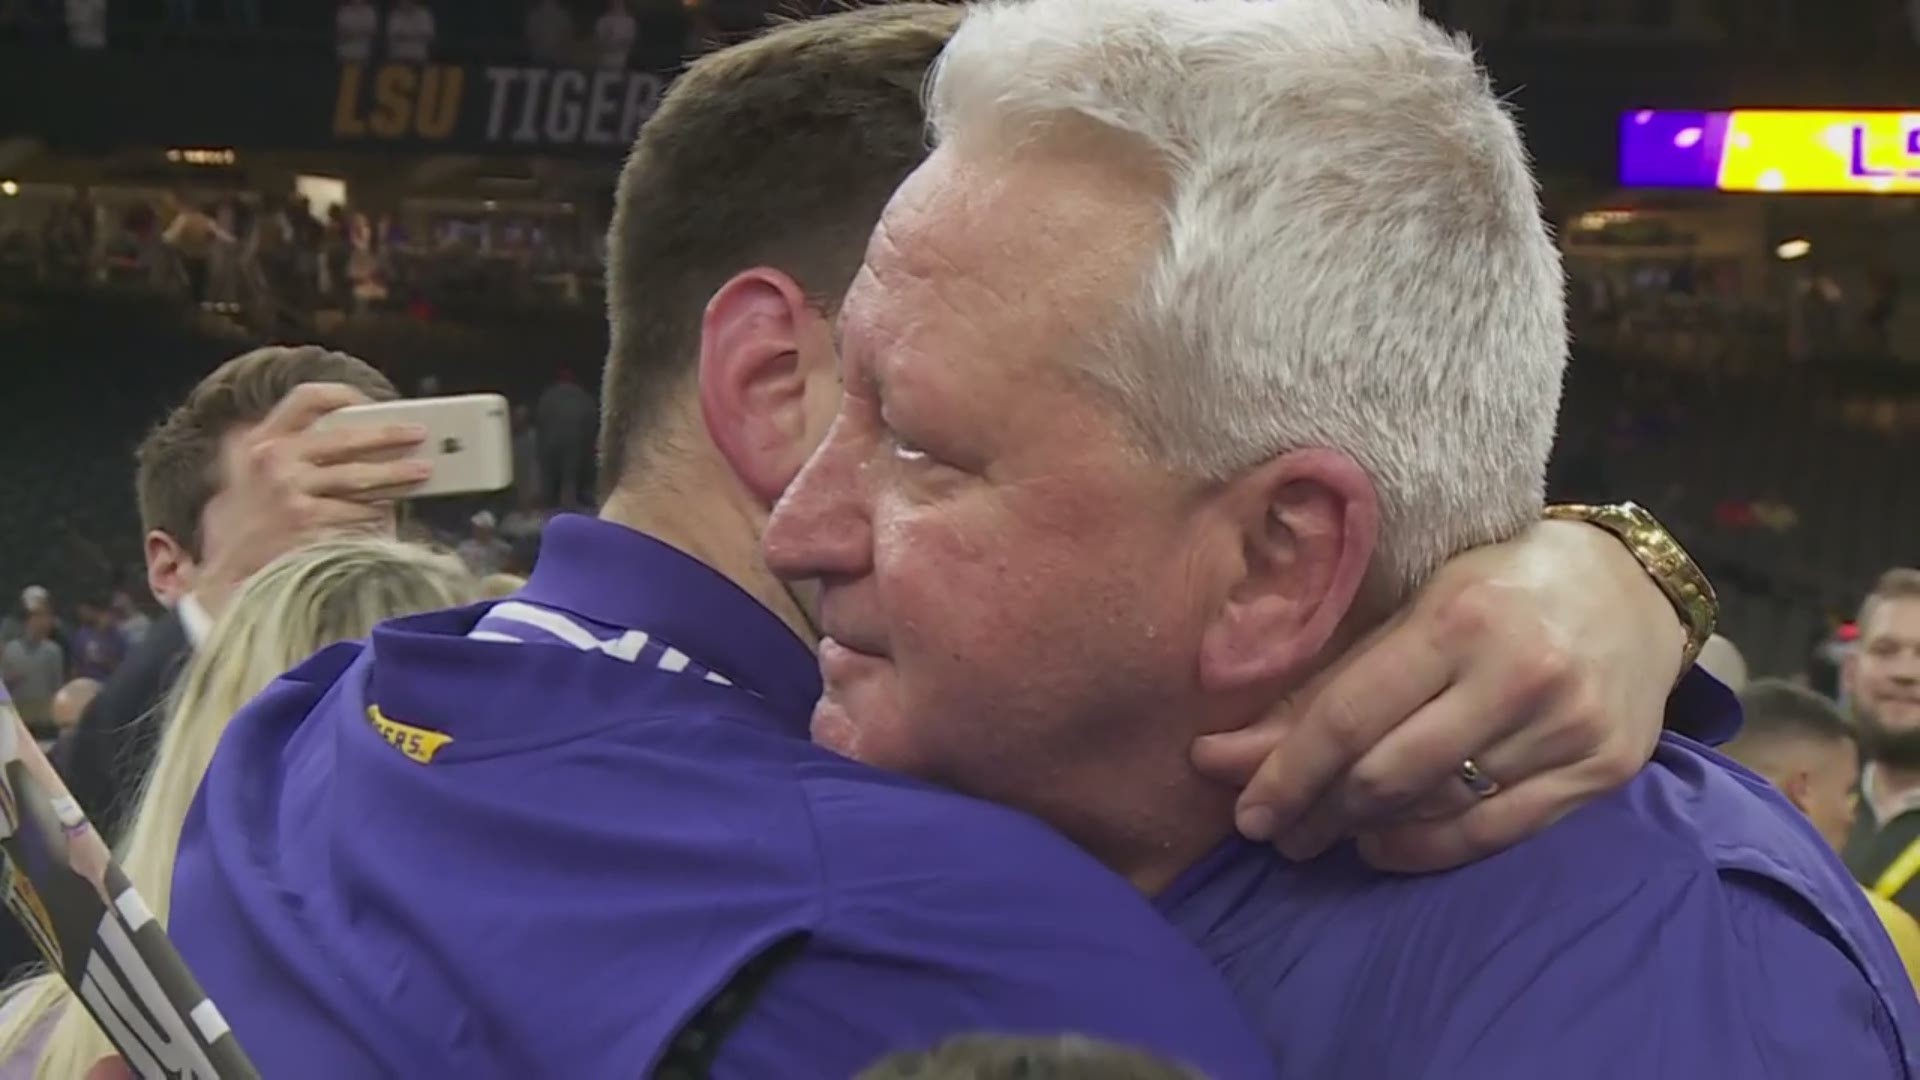 Family, the most important thing to anyone: LSU Offensive coordinator Steve Ensminger and his son, Steve Ensminger shared a moment after the LSU championship.